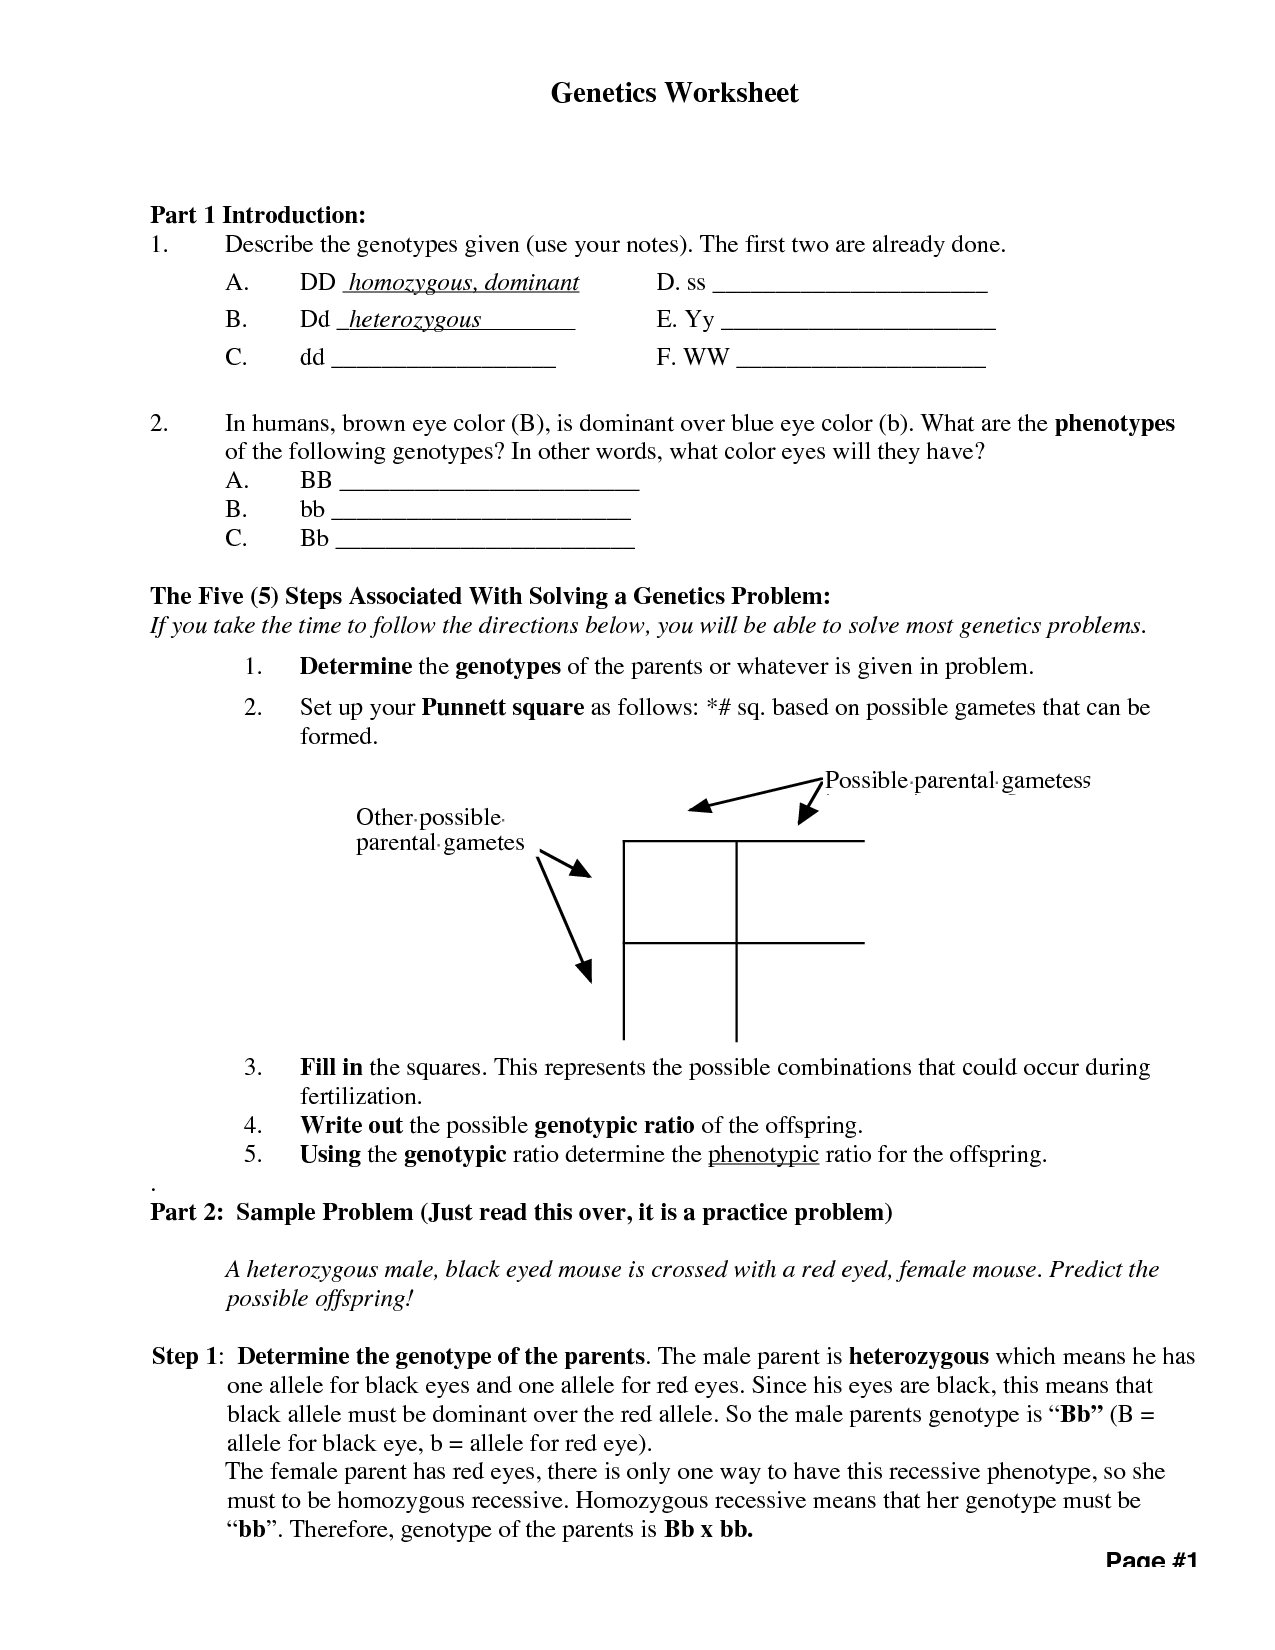 14-best-images-of-genetics-problems-worksheet-with-answer-keys-genetics-practice-problems